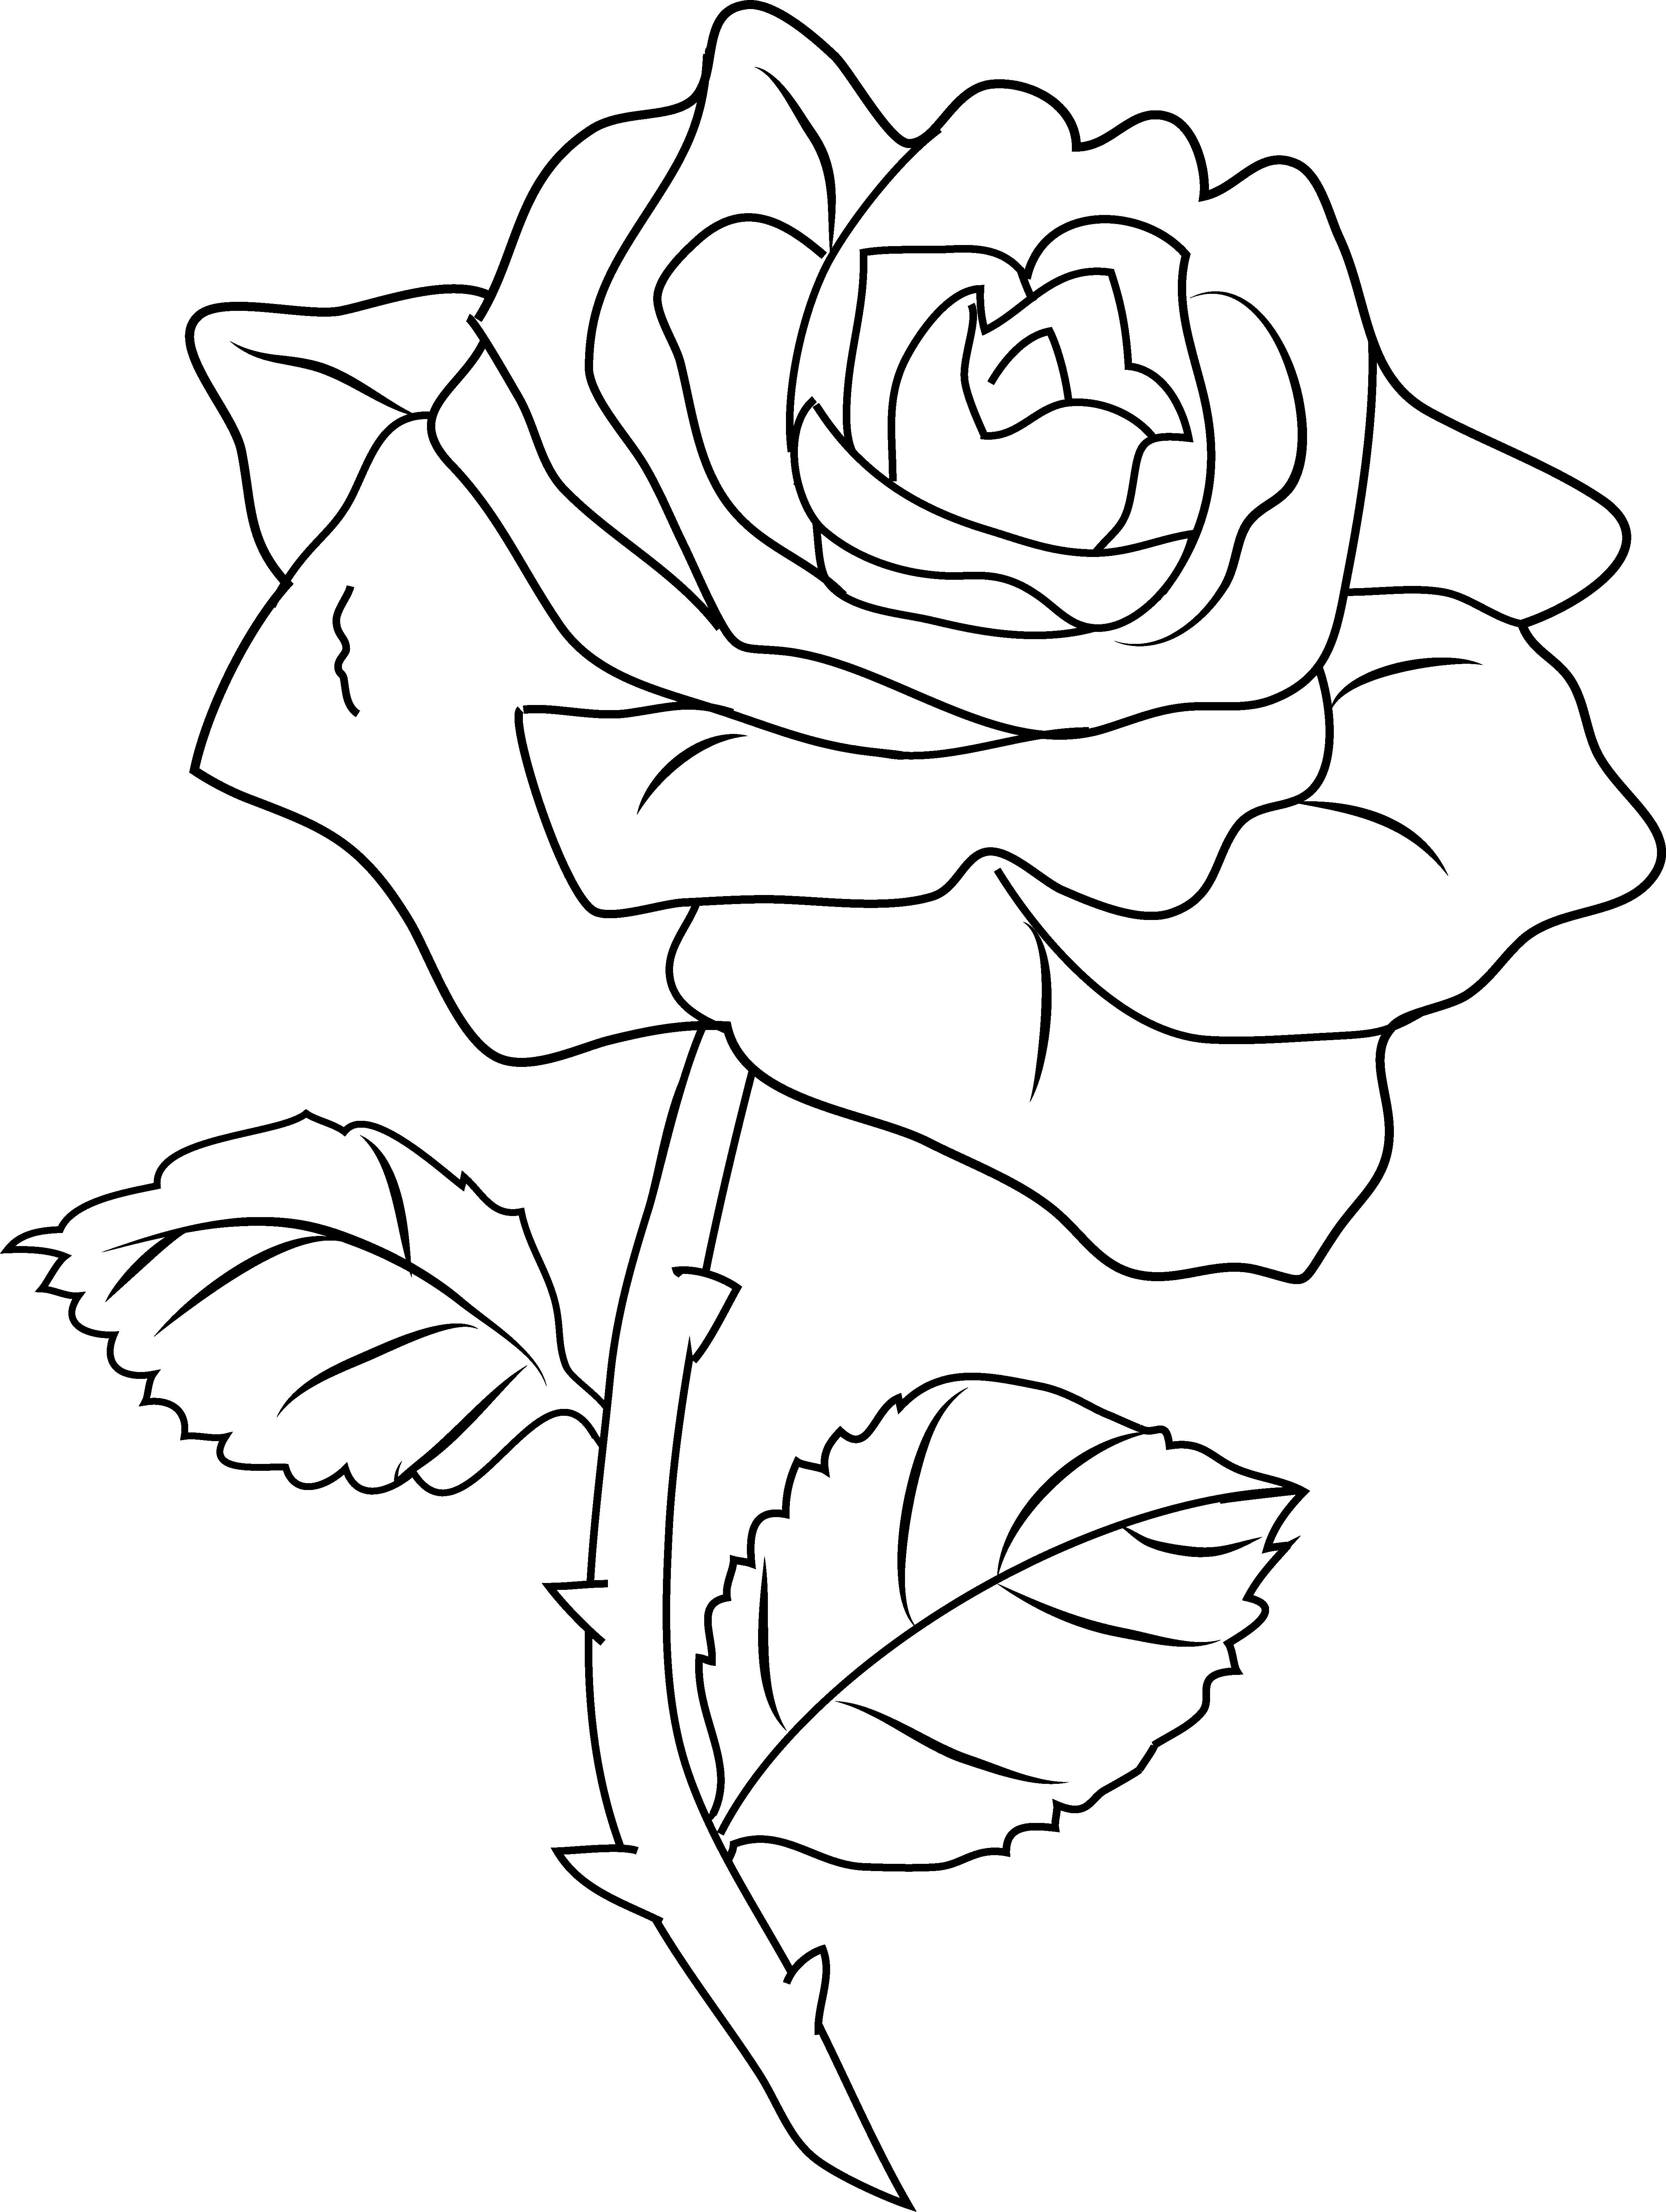 roses-161971-nature-free-printable-coloring-pages